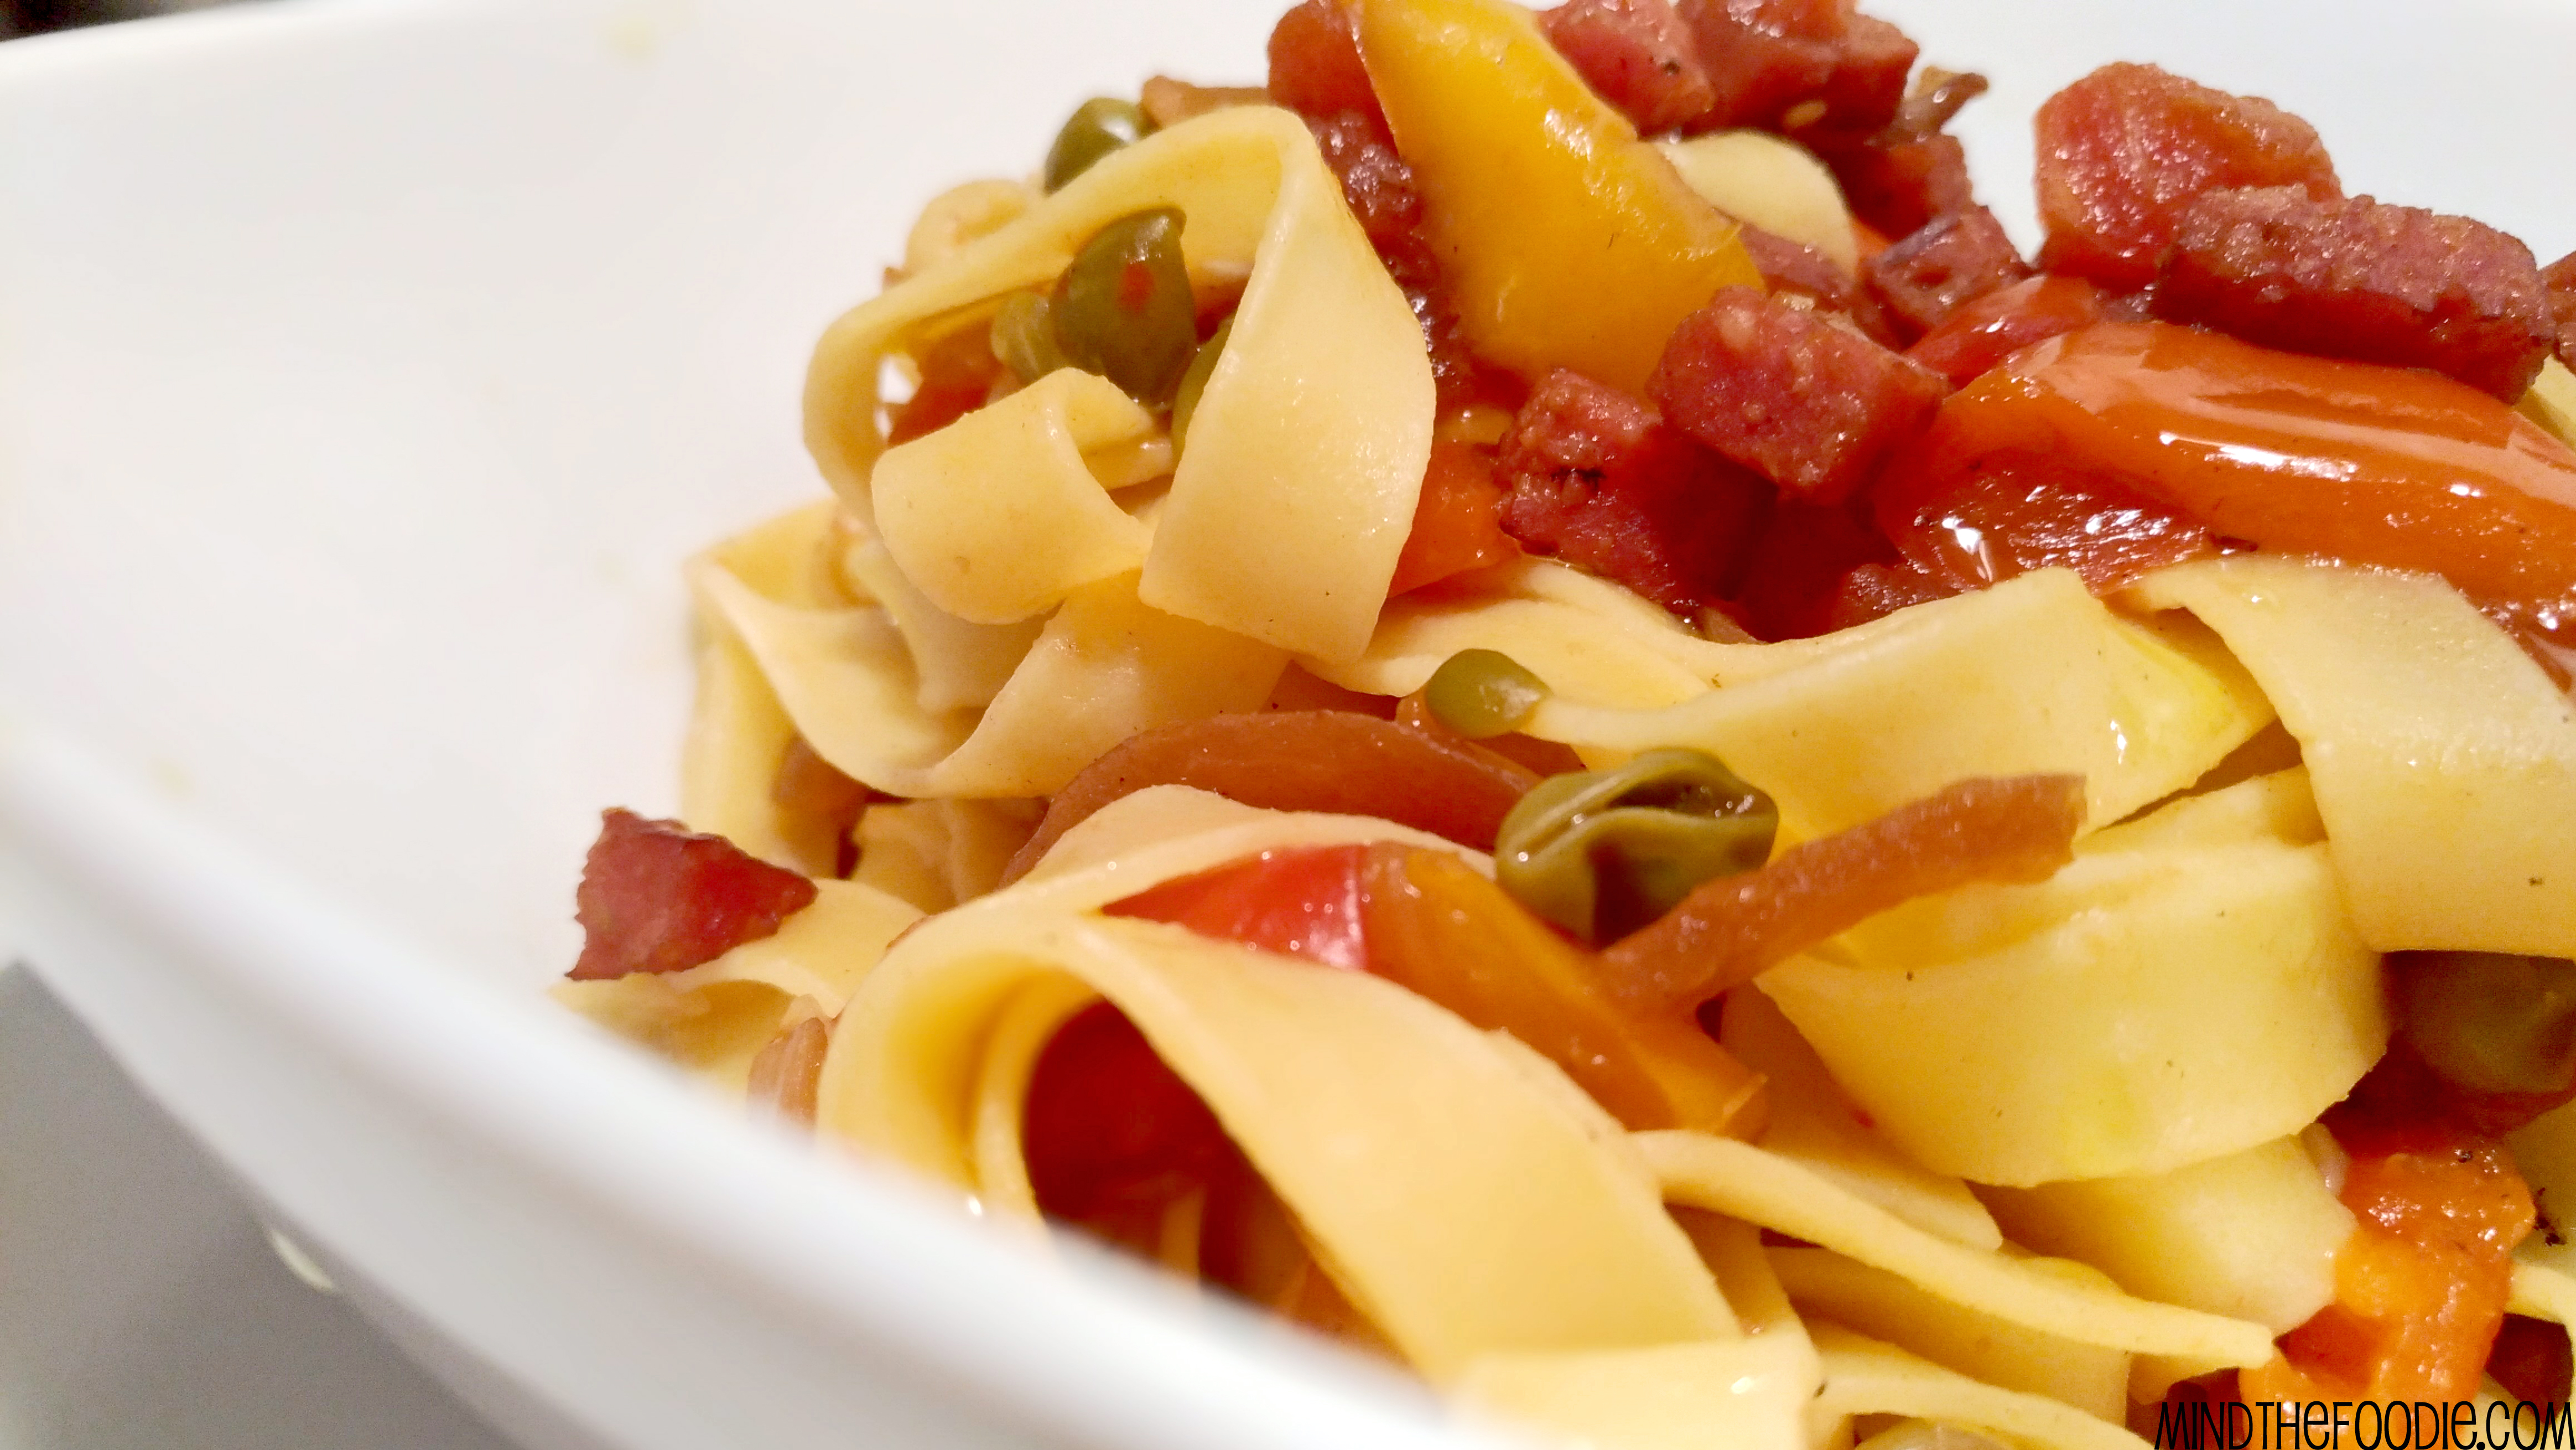 TAGLIATELLE PASTA WITH BELL PEPPERS & SALAMI